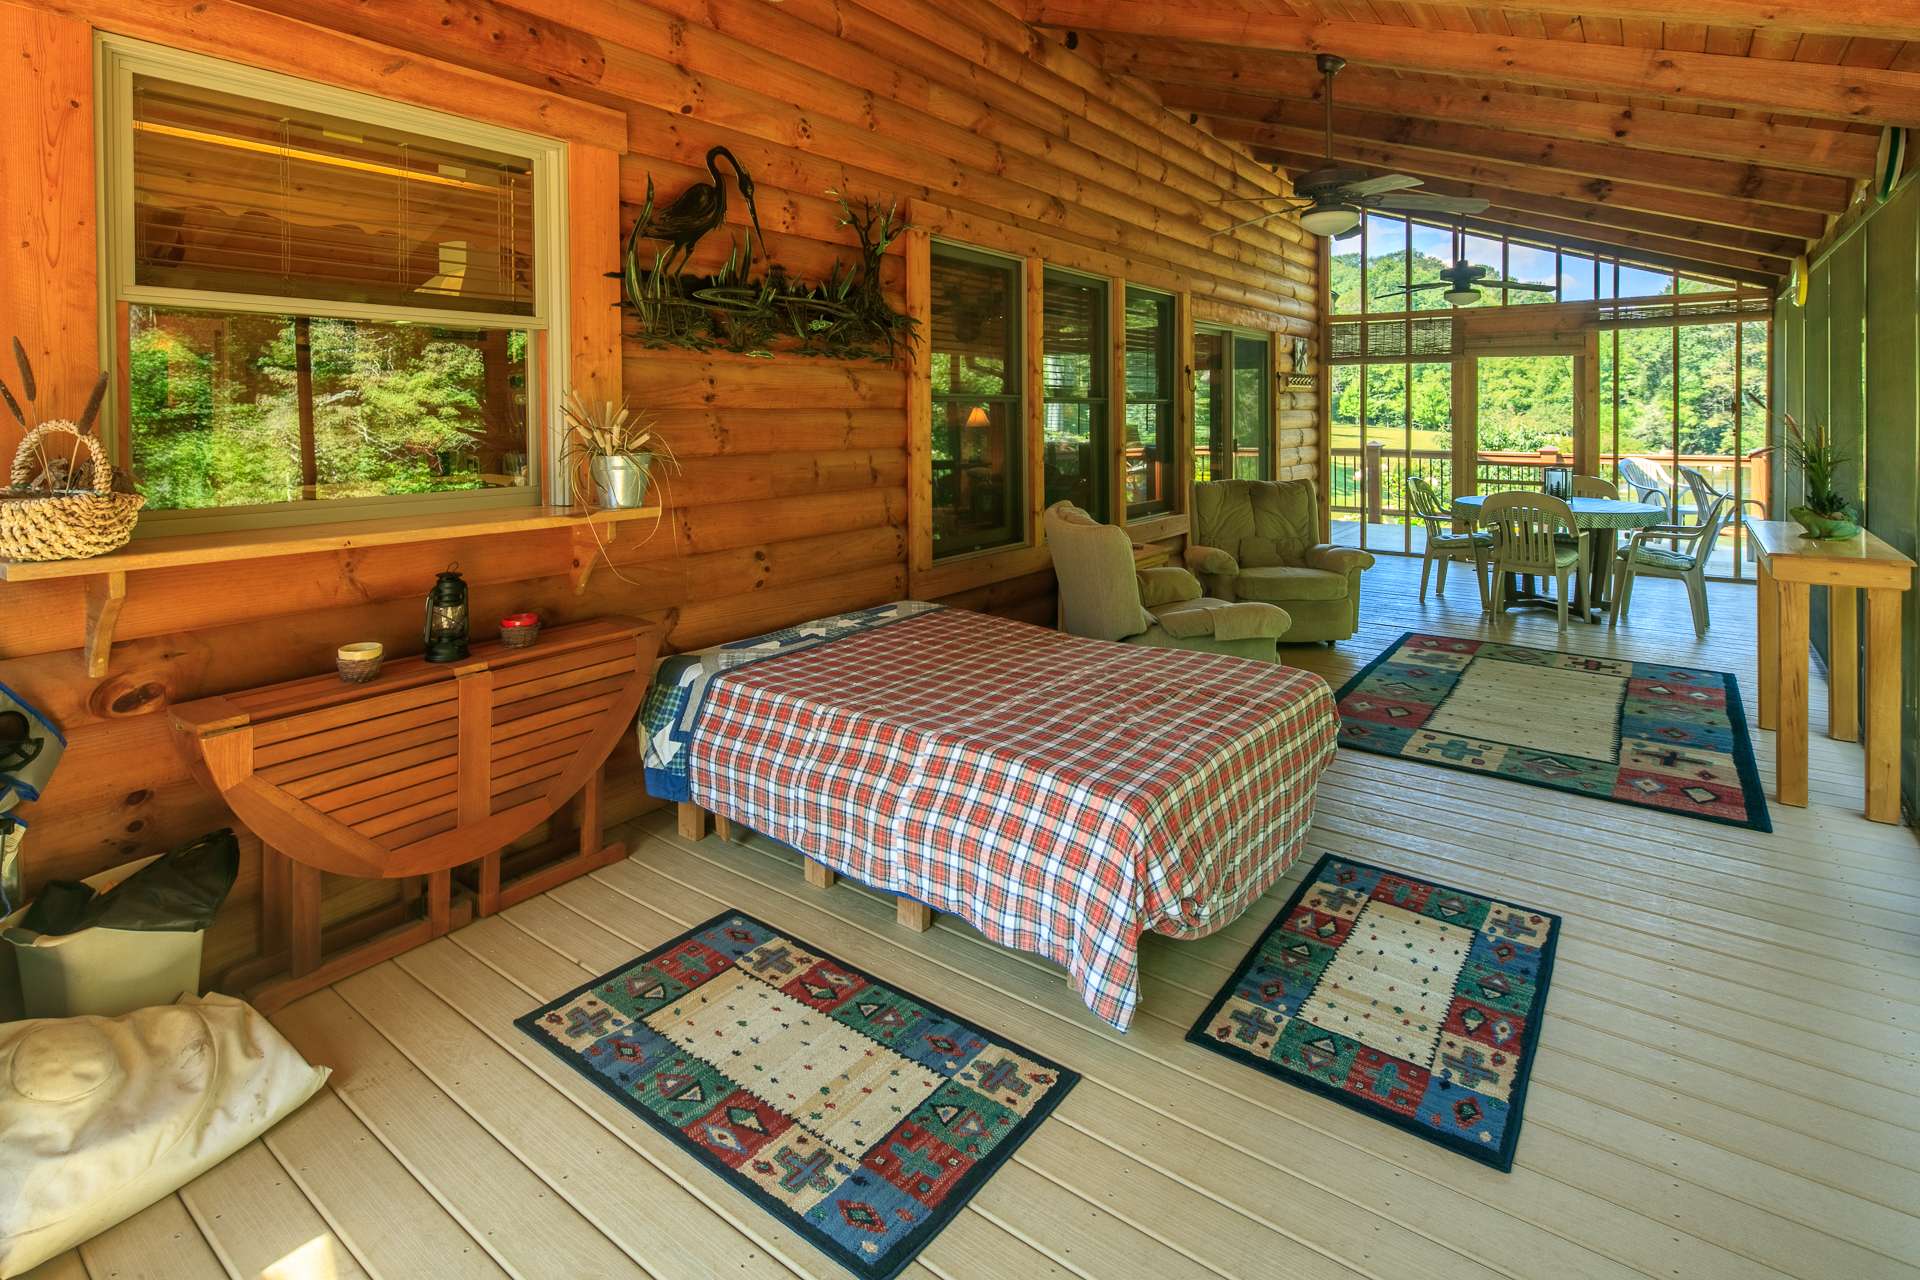 This covered and screened porch expands the living space during the warmer months.  On warm summer evenings you might choose to sleep outside with the sounds of creek below.